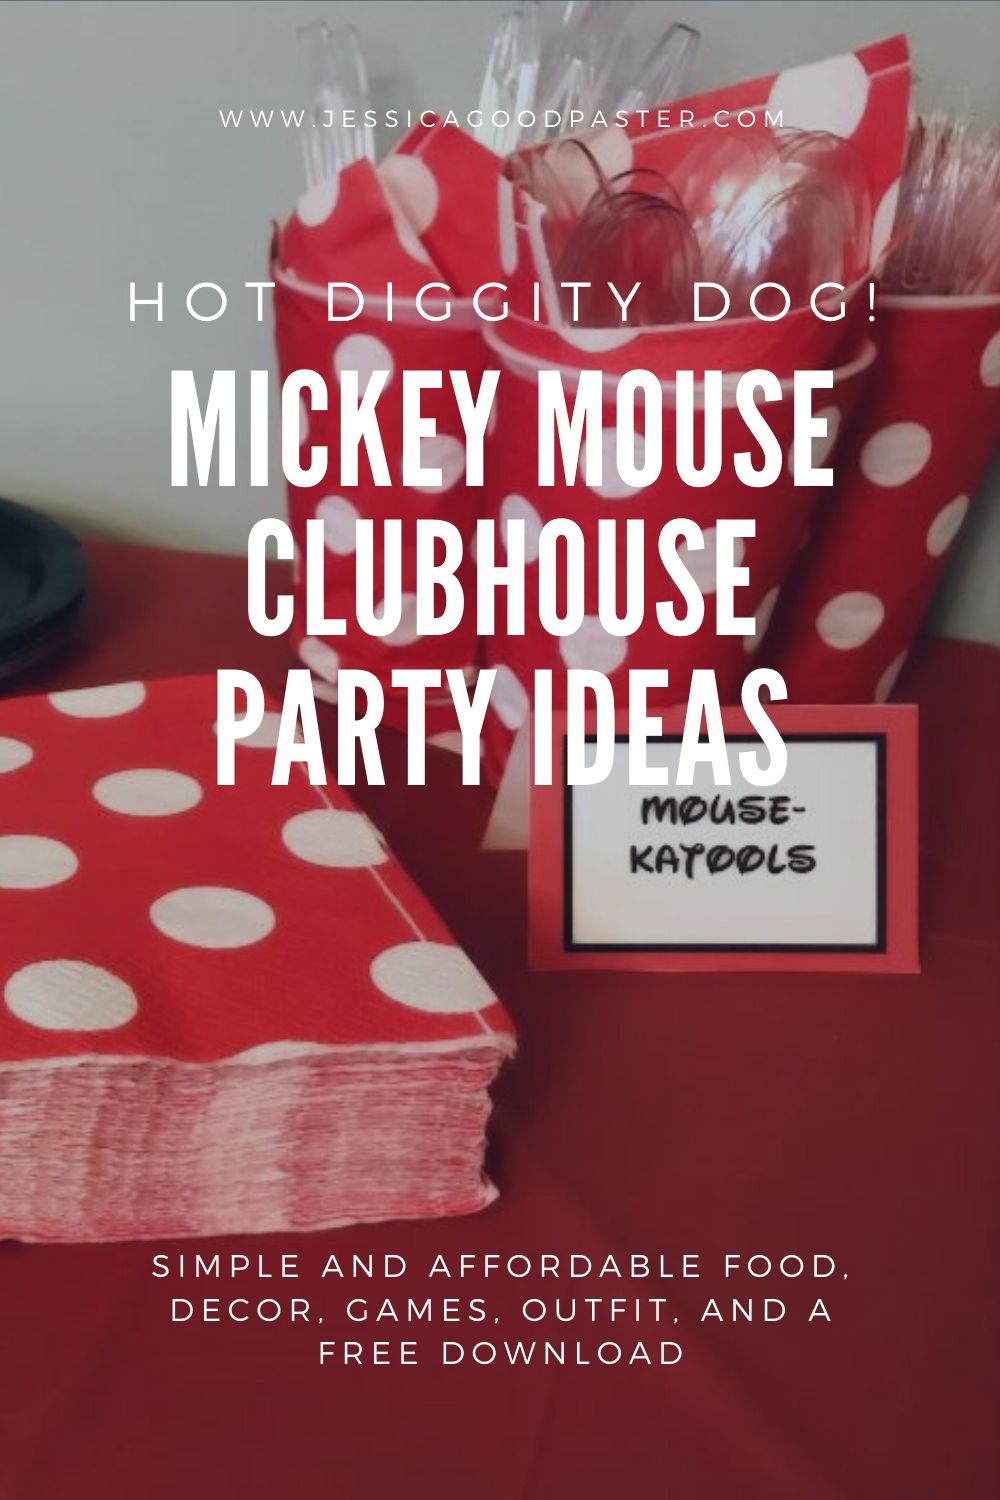 How to Host an Amazing Mickey Mouse Party on a Budget | Tons of affordable options for Mickey or Minnie parties including food ideas, decorations, outfits, games, party supplies, and free printables! Your Mickey Mouse Clubhouse fan will have a great birthday ! #mickeyparty #mickeymouse #mickeymouseparty #minnieparty #birthday #mickeymouseclubhouse #mickeyprintables